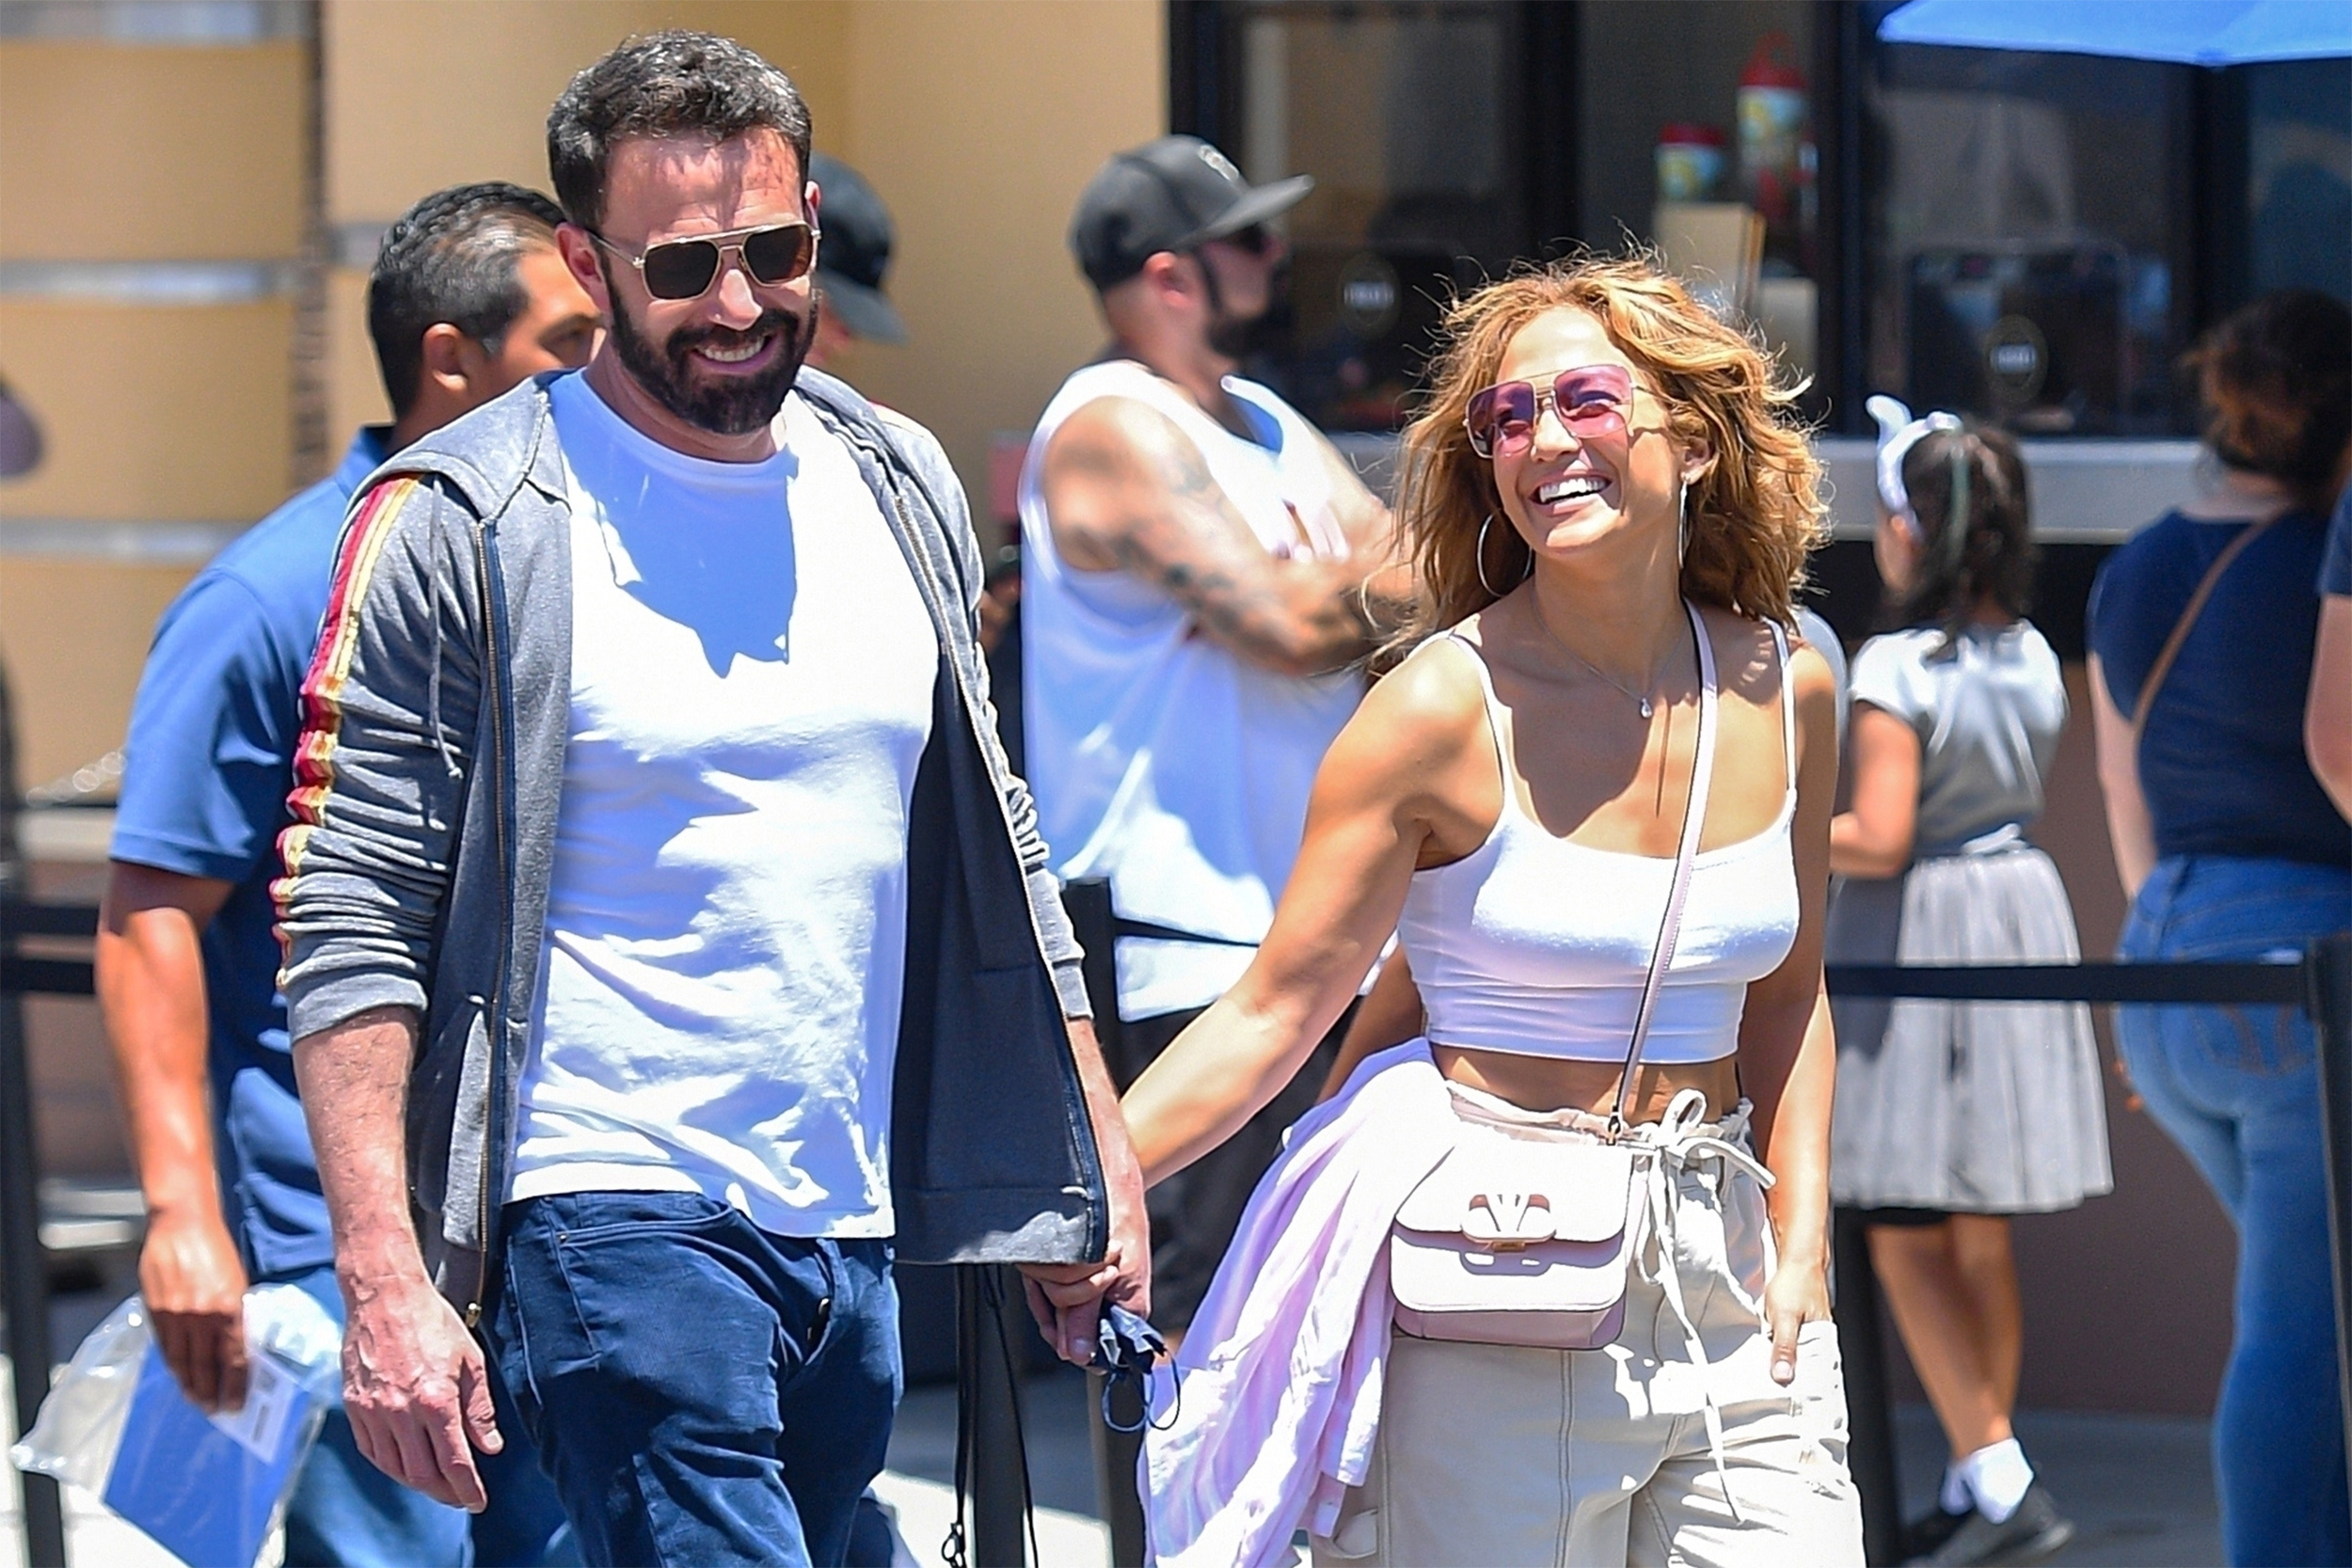 Jennifer Lopez and Ben Affleck got invited to a night out with Emme, J. Lo’s daughter